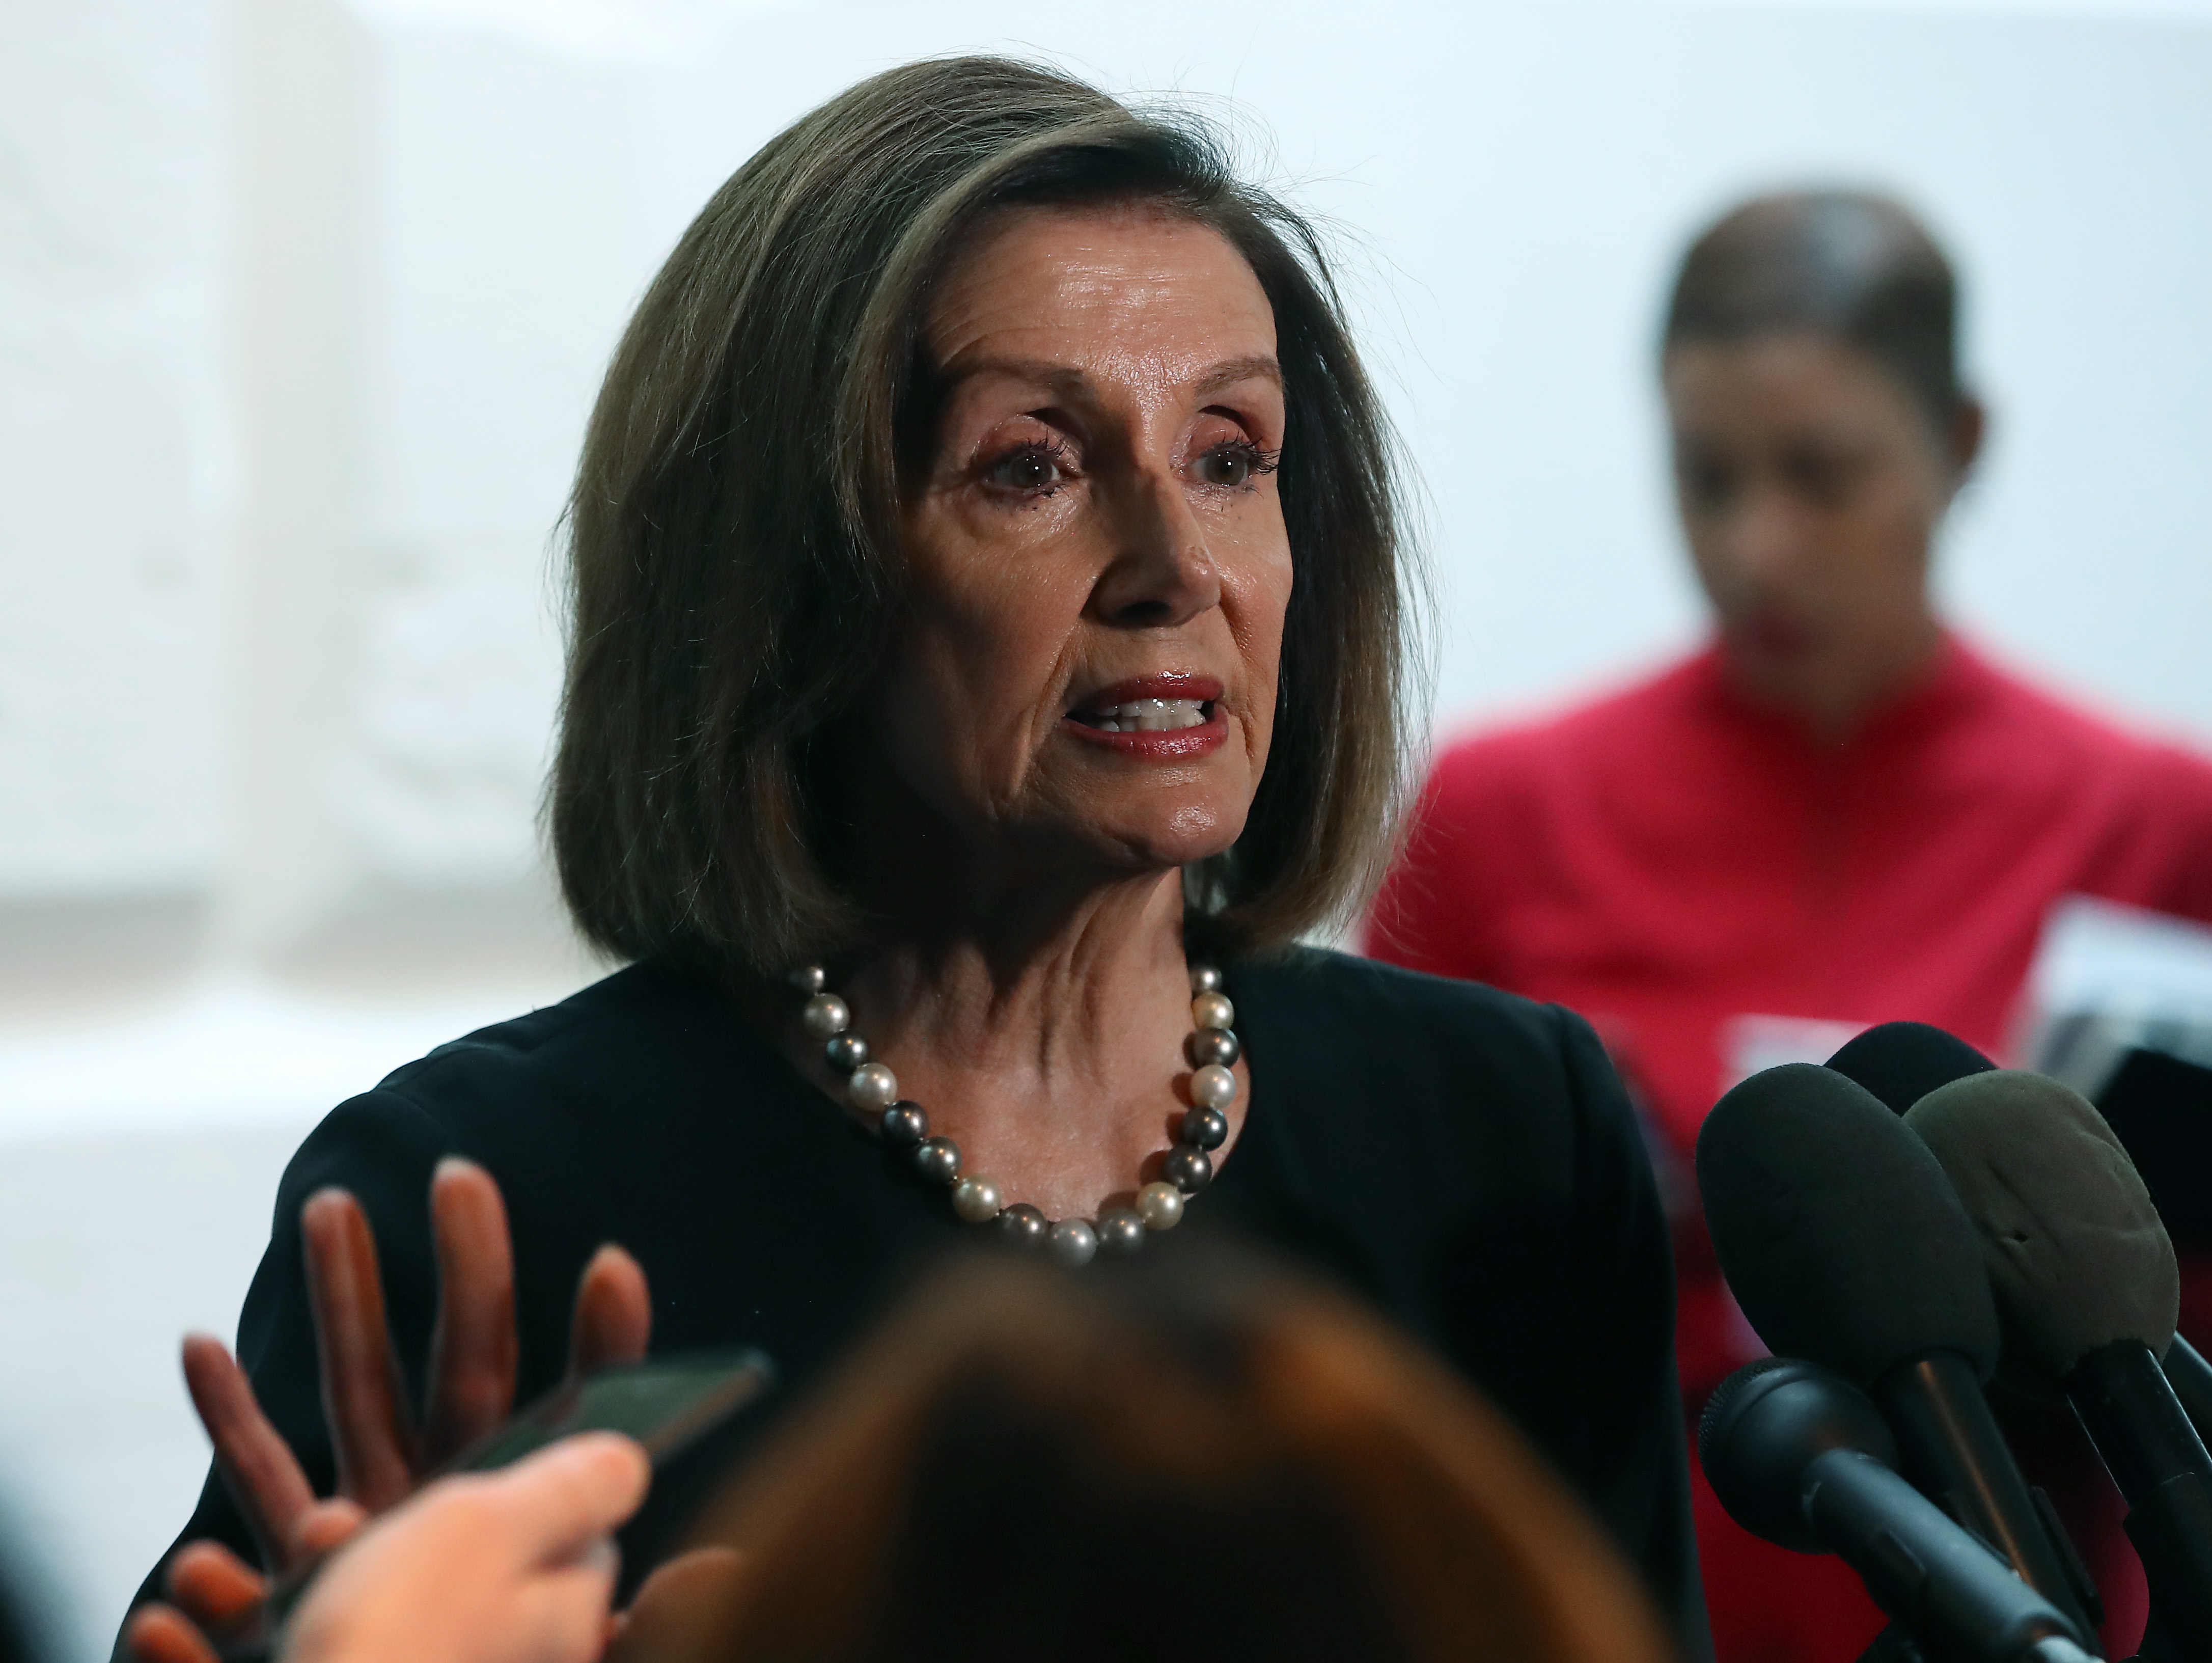 Speaker of the House Nancy Pelosi (D-CA) speaks to the media after a meeting with the House Democratic caucus one day after she announced that House Democrats will start an impeachment injury of U.S. President Donald Trump. (Mark Wilson/Getty Images)